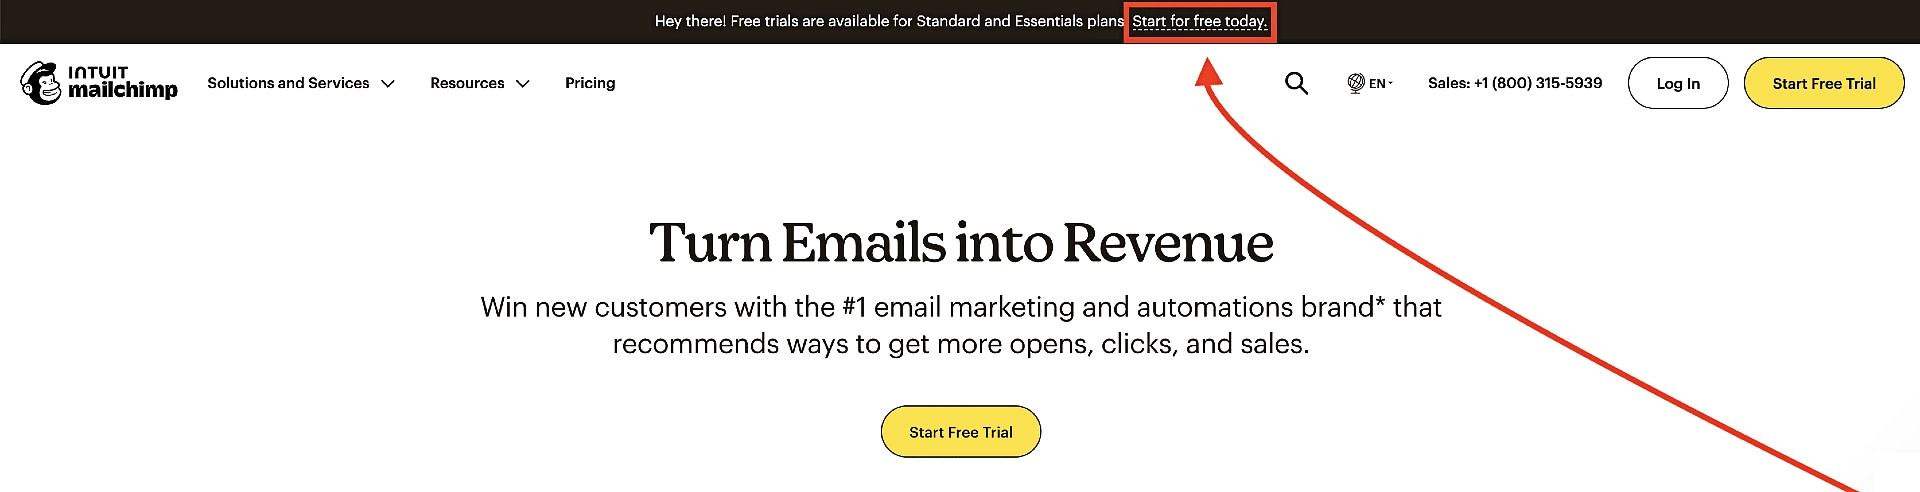 Click "start for free today" on the MailChimp homepage.